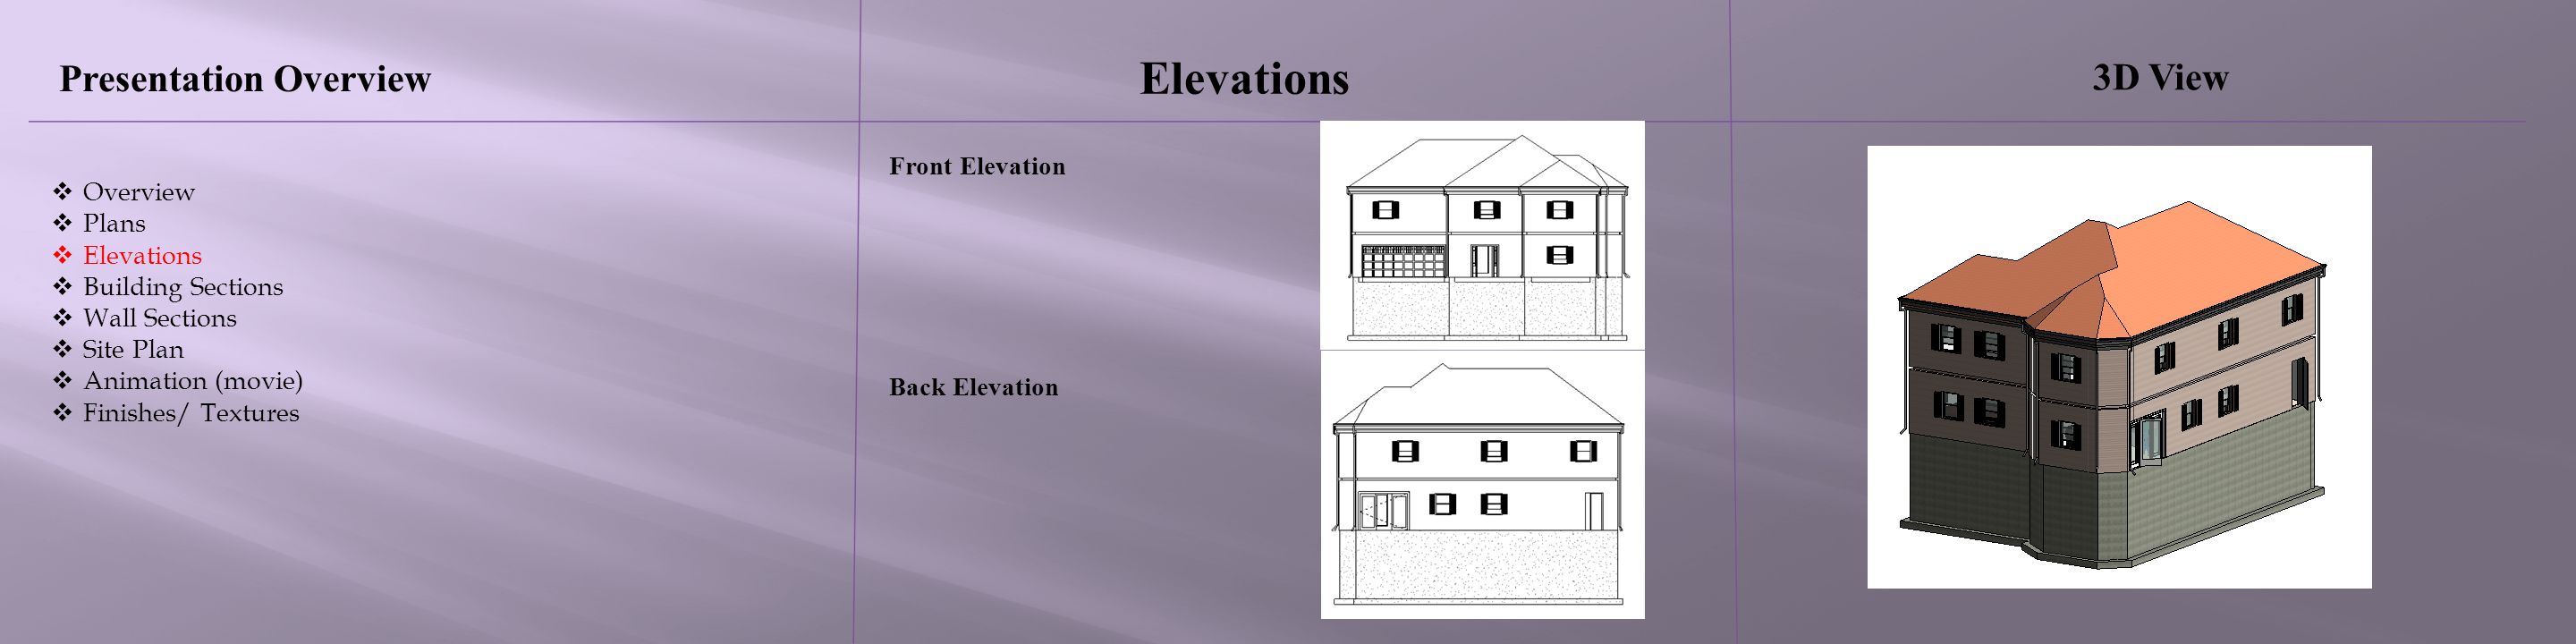 Elevations Presentation Overview 3D View Front Elevation Overview